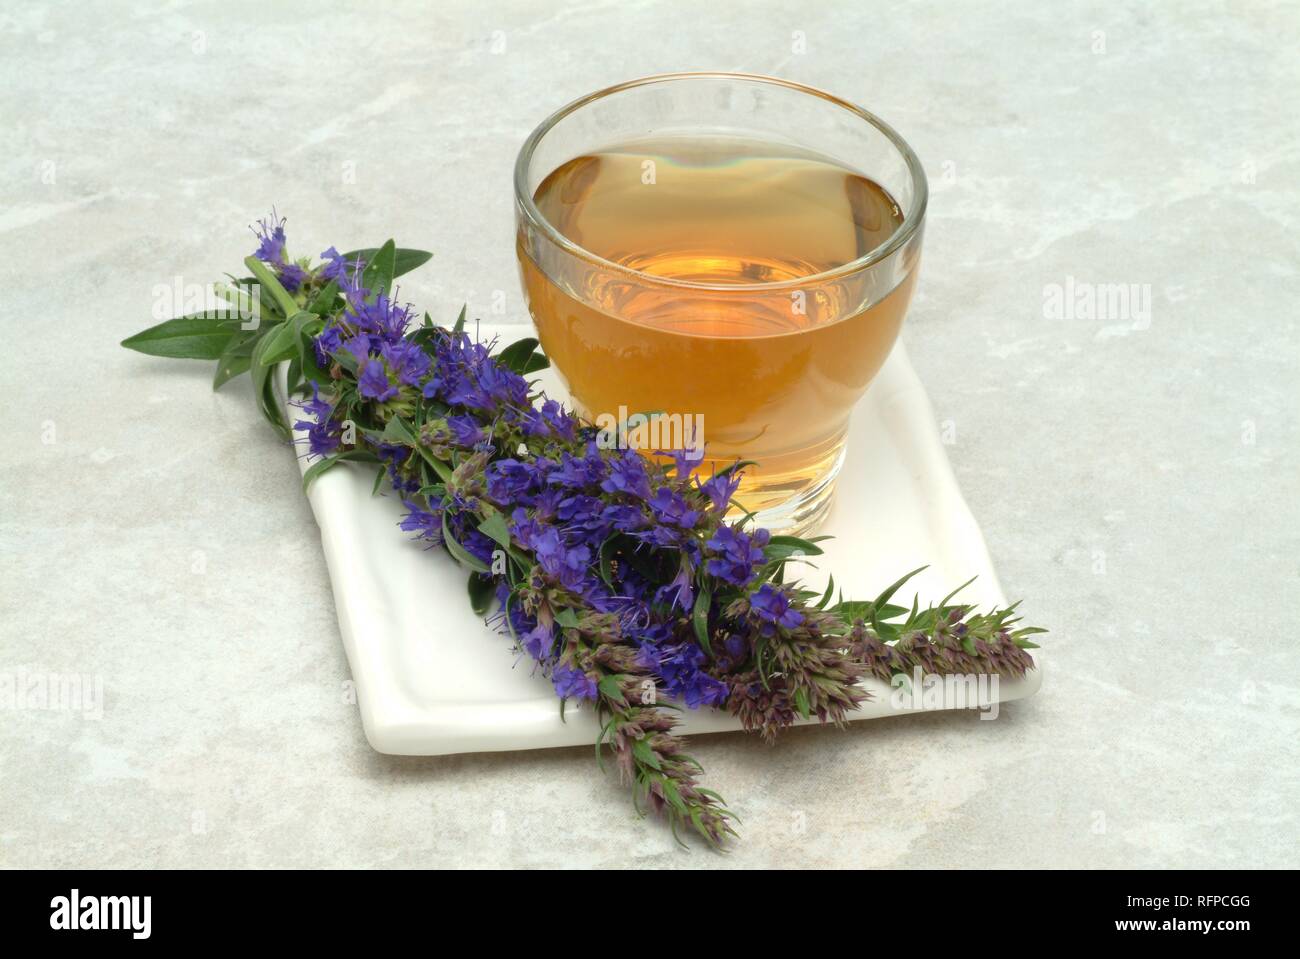 Herb tea made of Hyssop, Hyssopus officinalis Stock Photo